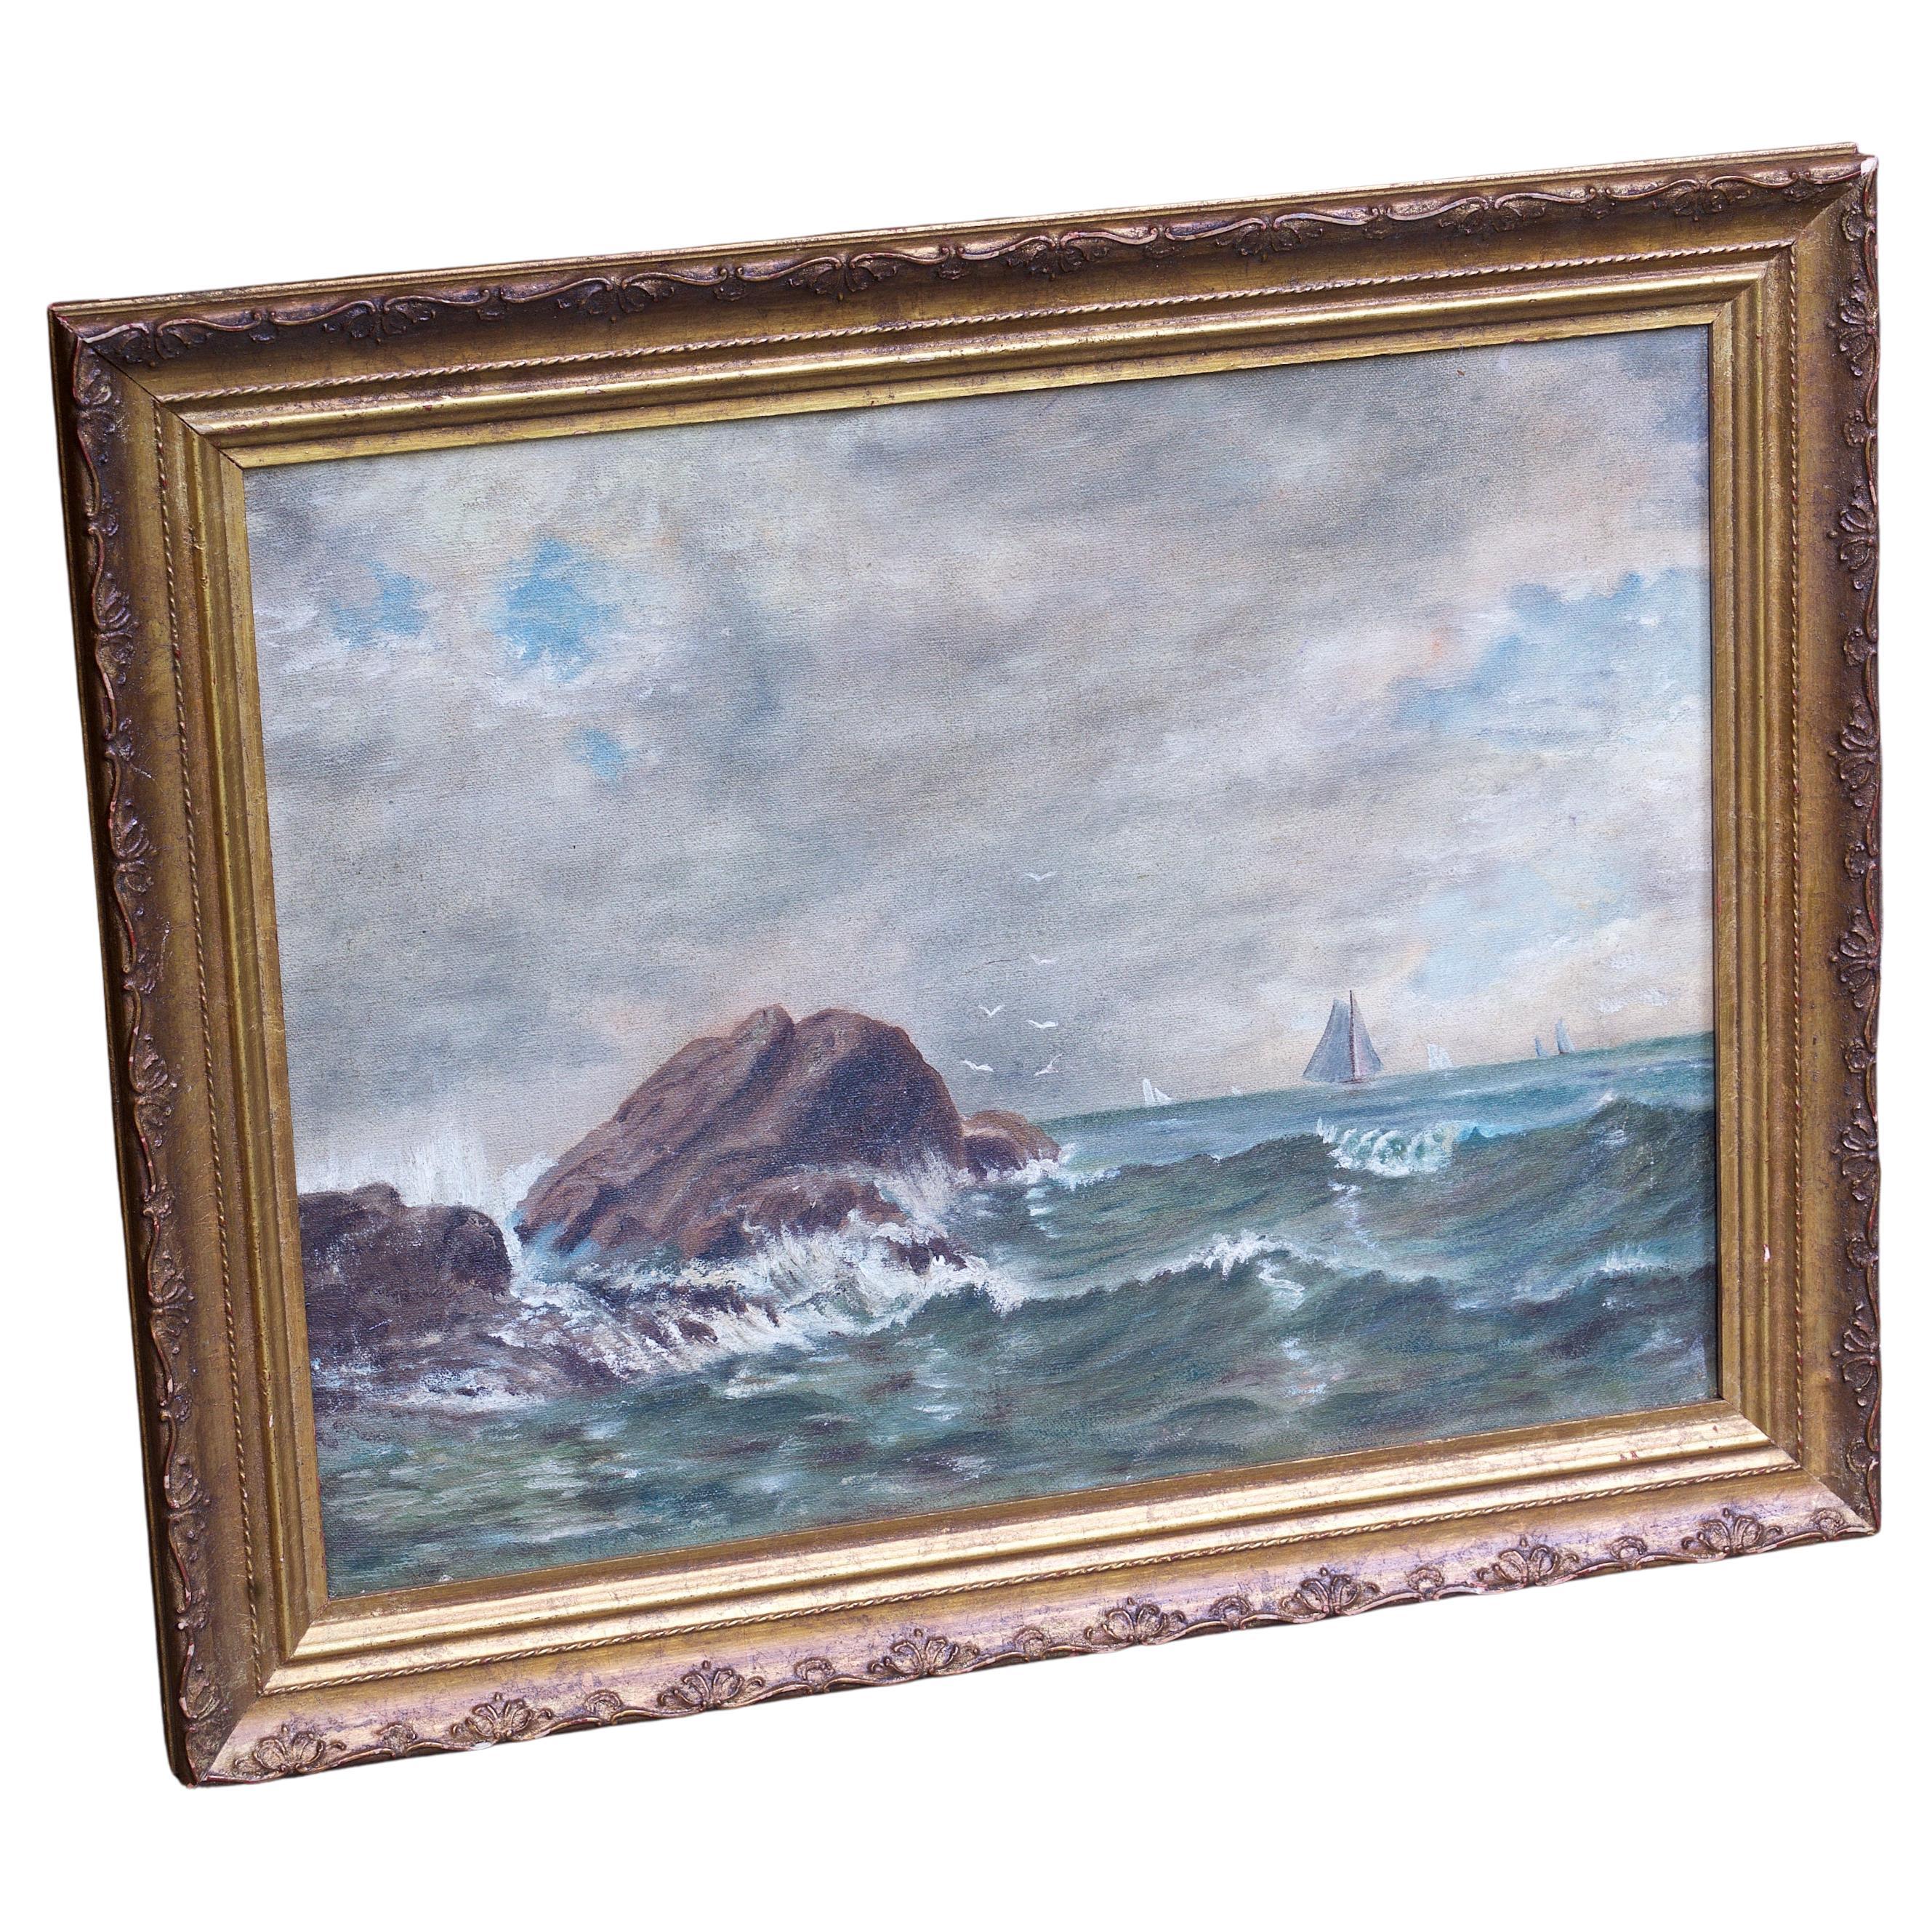 Antique Mid 19th Century Seascape Oil Painting with Rocks and Ship For Sale